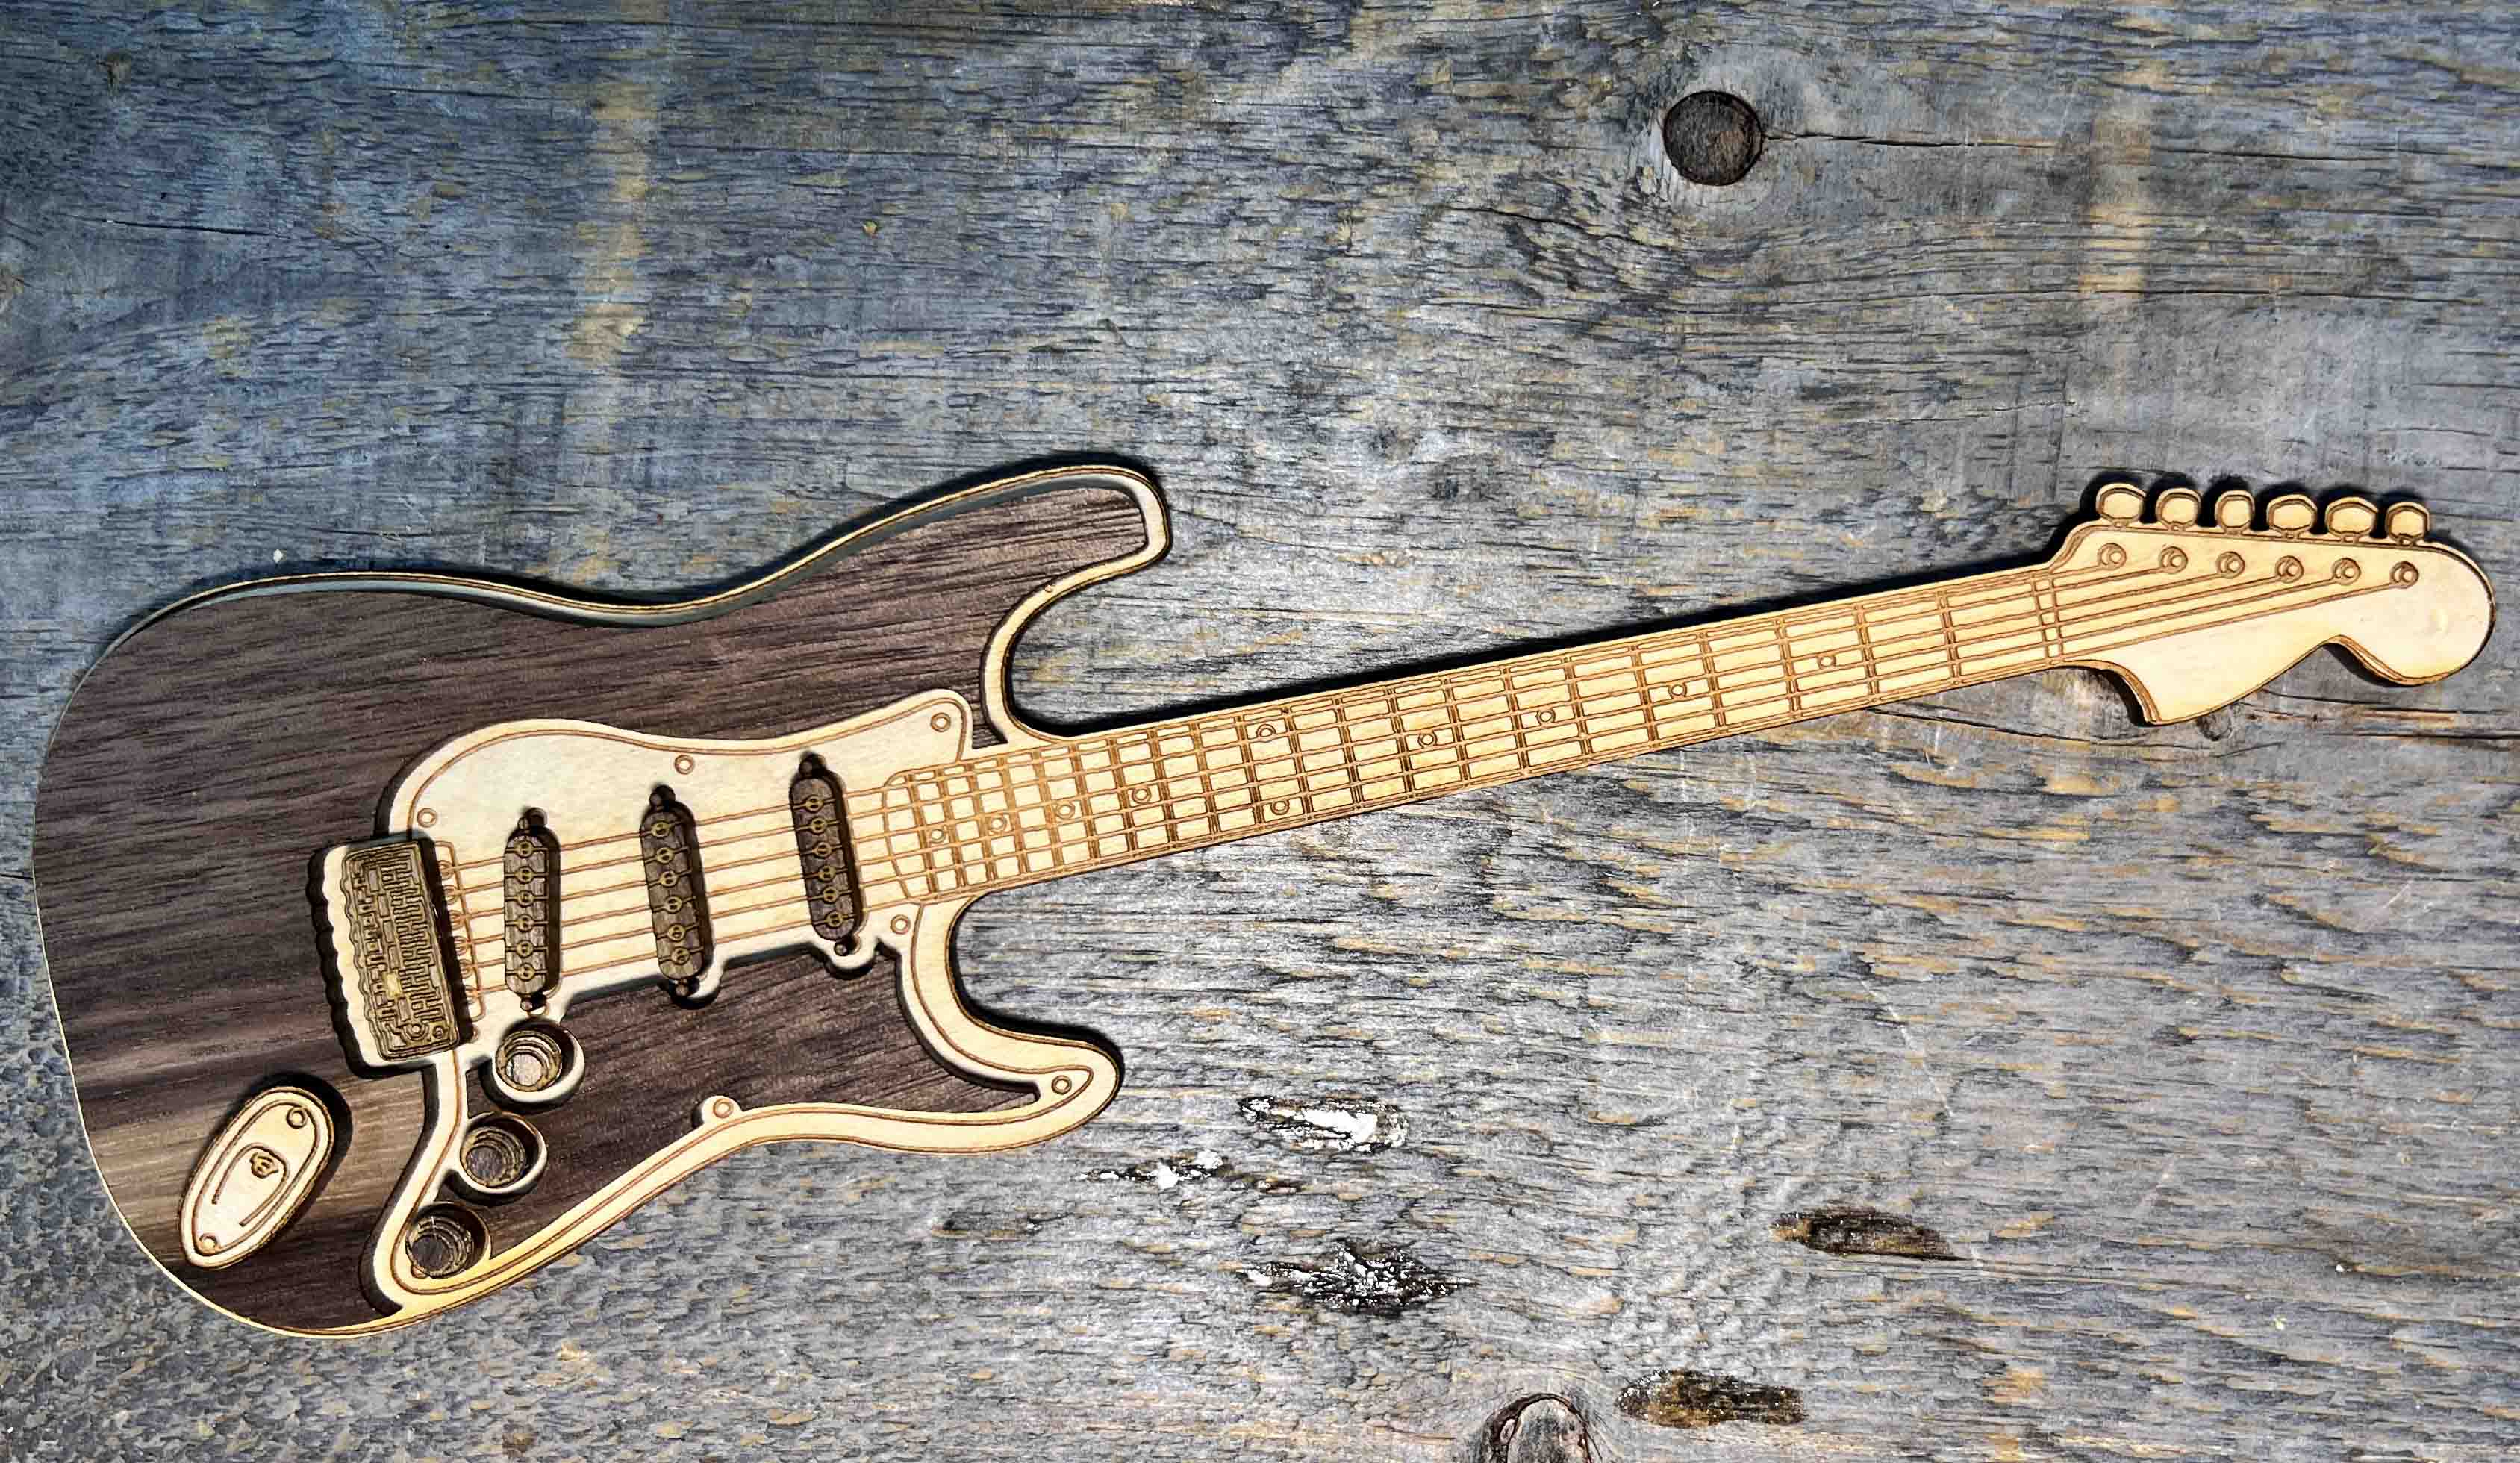 Wooden Electric Guitar Sign